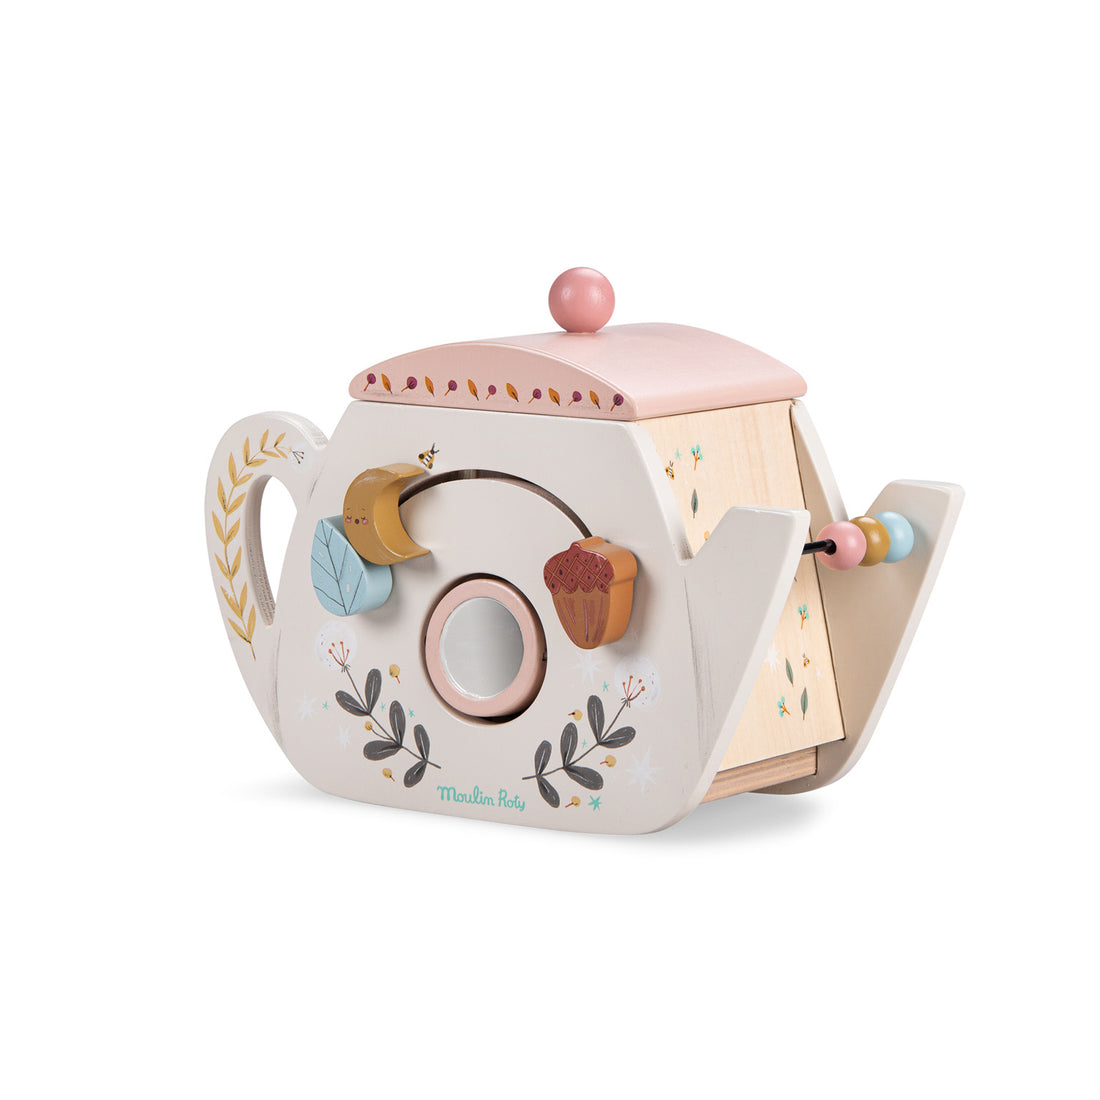 moulin-roty-apres-la-pluie-wooden-activity-teapot-with-6-activities-wooden-toy-moul-715368